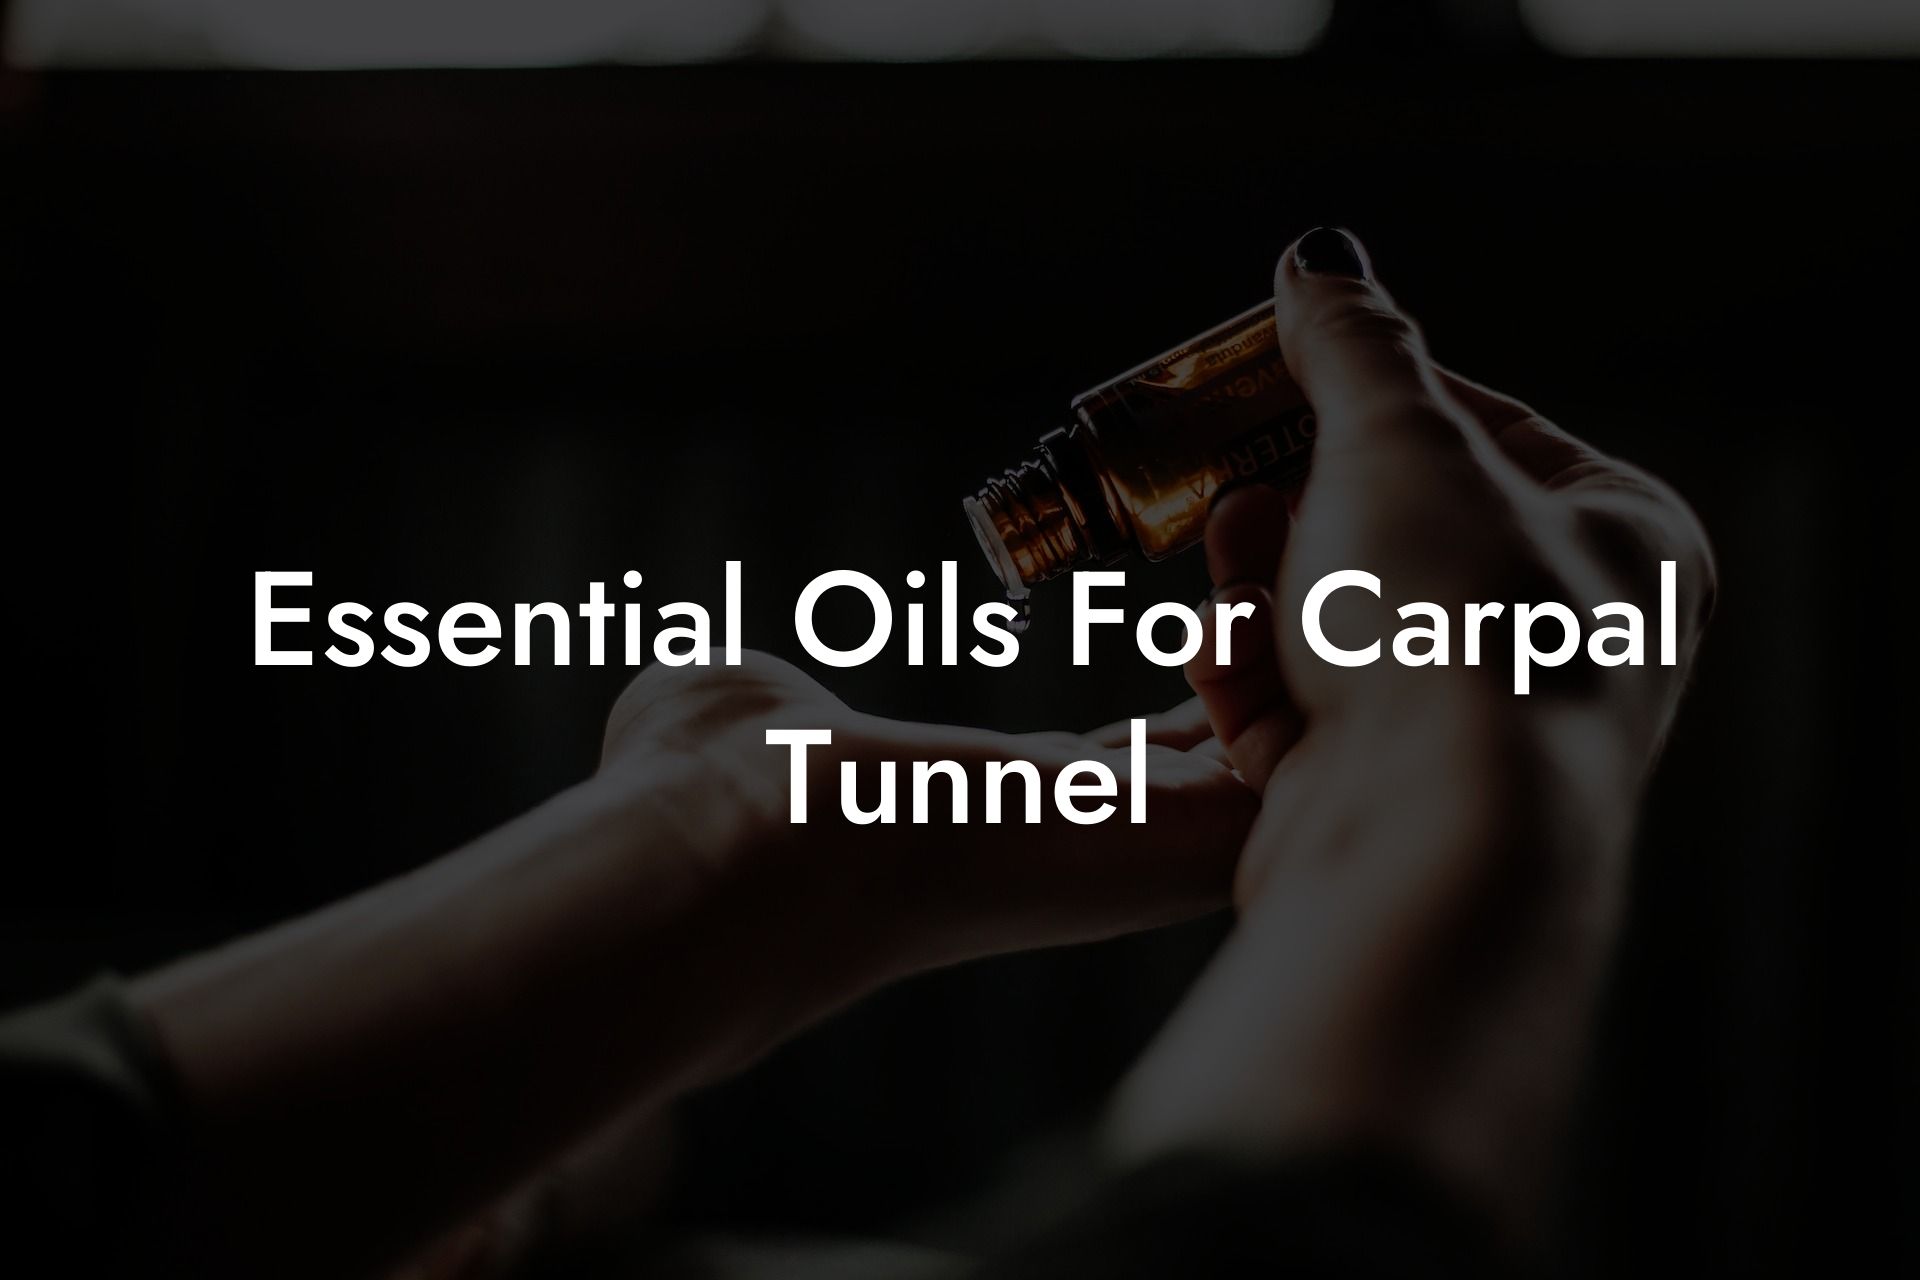 Essential Oils For Carpal Tunnel